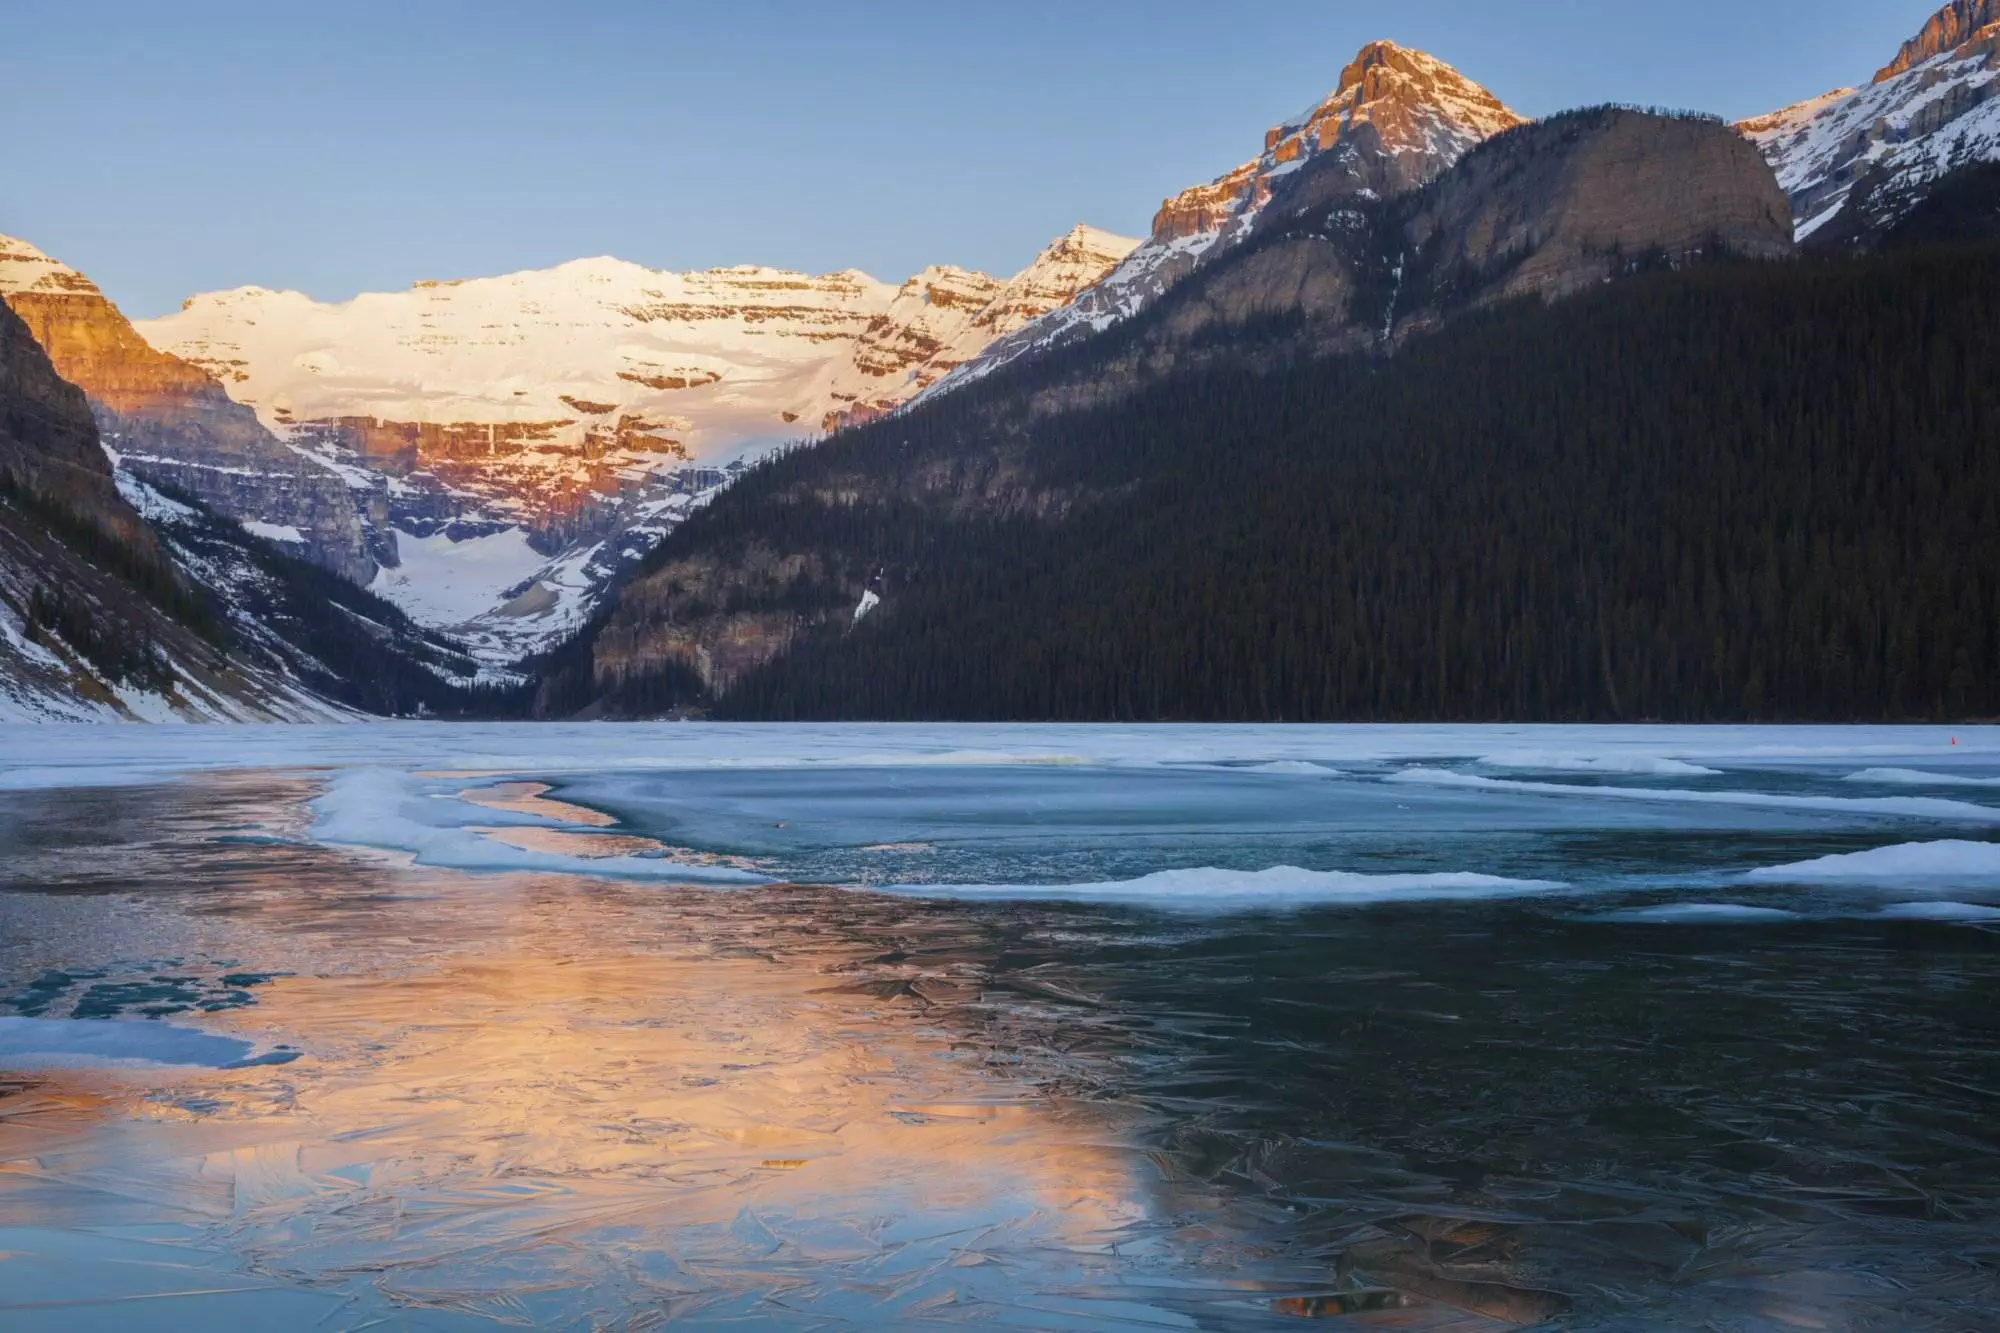 A magical display of Sunlight and mountains at Lake Louise.